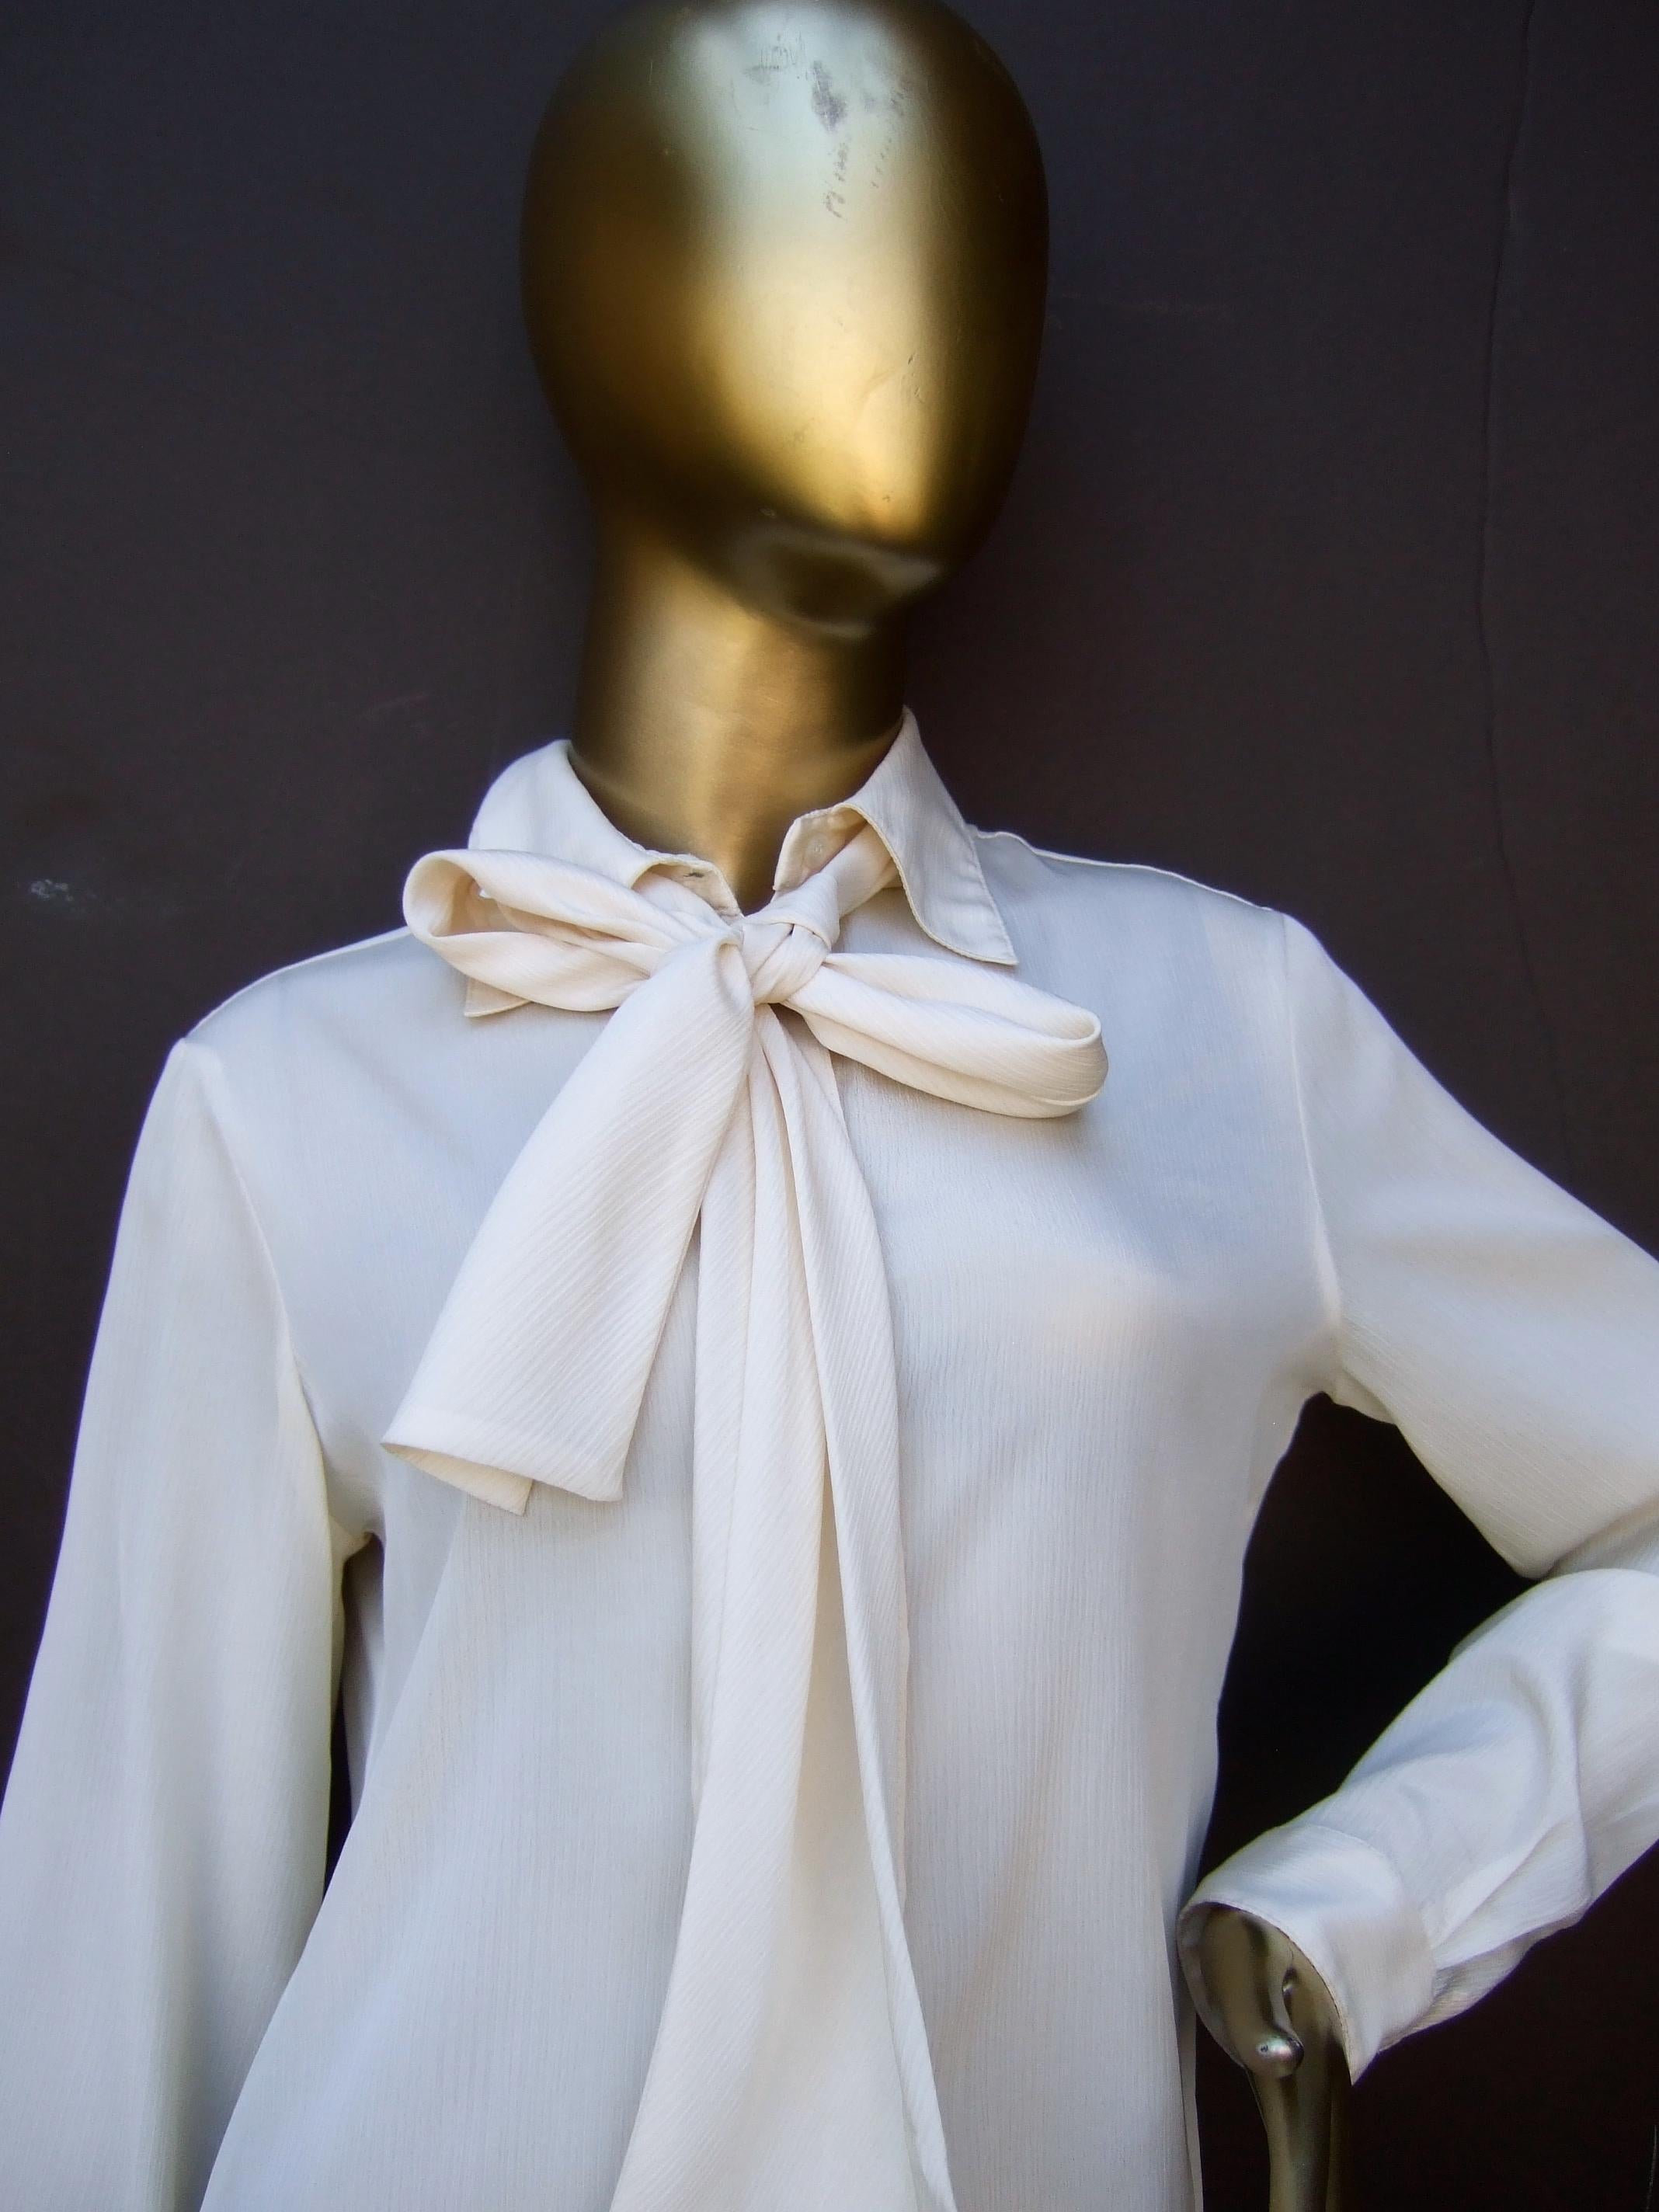 Halston VI Cream sheer polyester pussy cat bow blouse for Neiman Marcus c 1970s
The vintage designer blouse has a cream satin acetate collar & cuffs
The blouse & matching bow tie collar are constructed with a sheer light weight polyester fabric

The